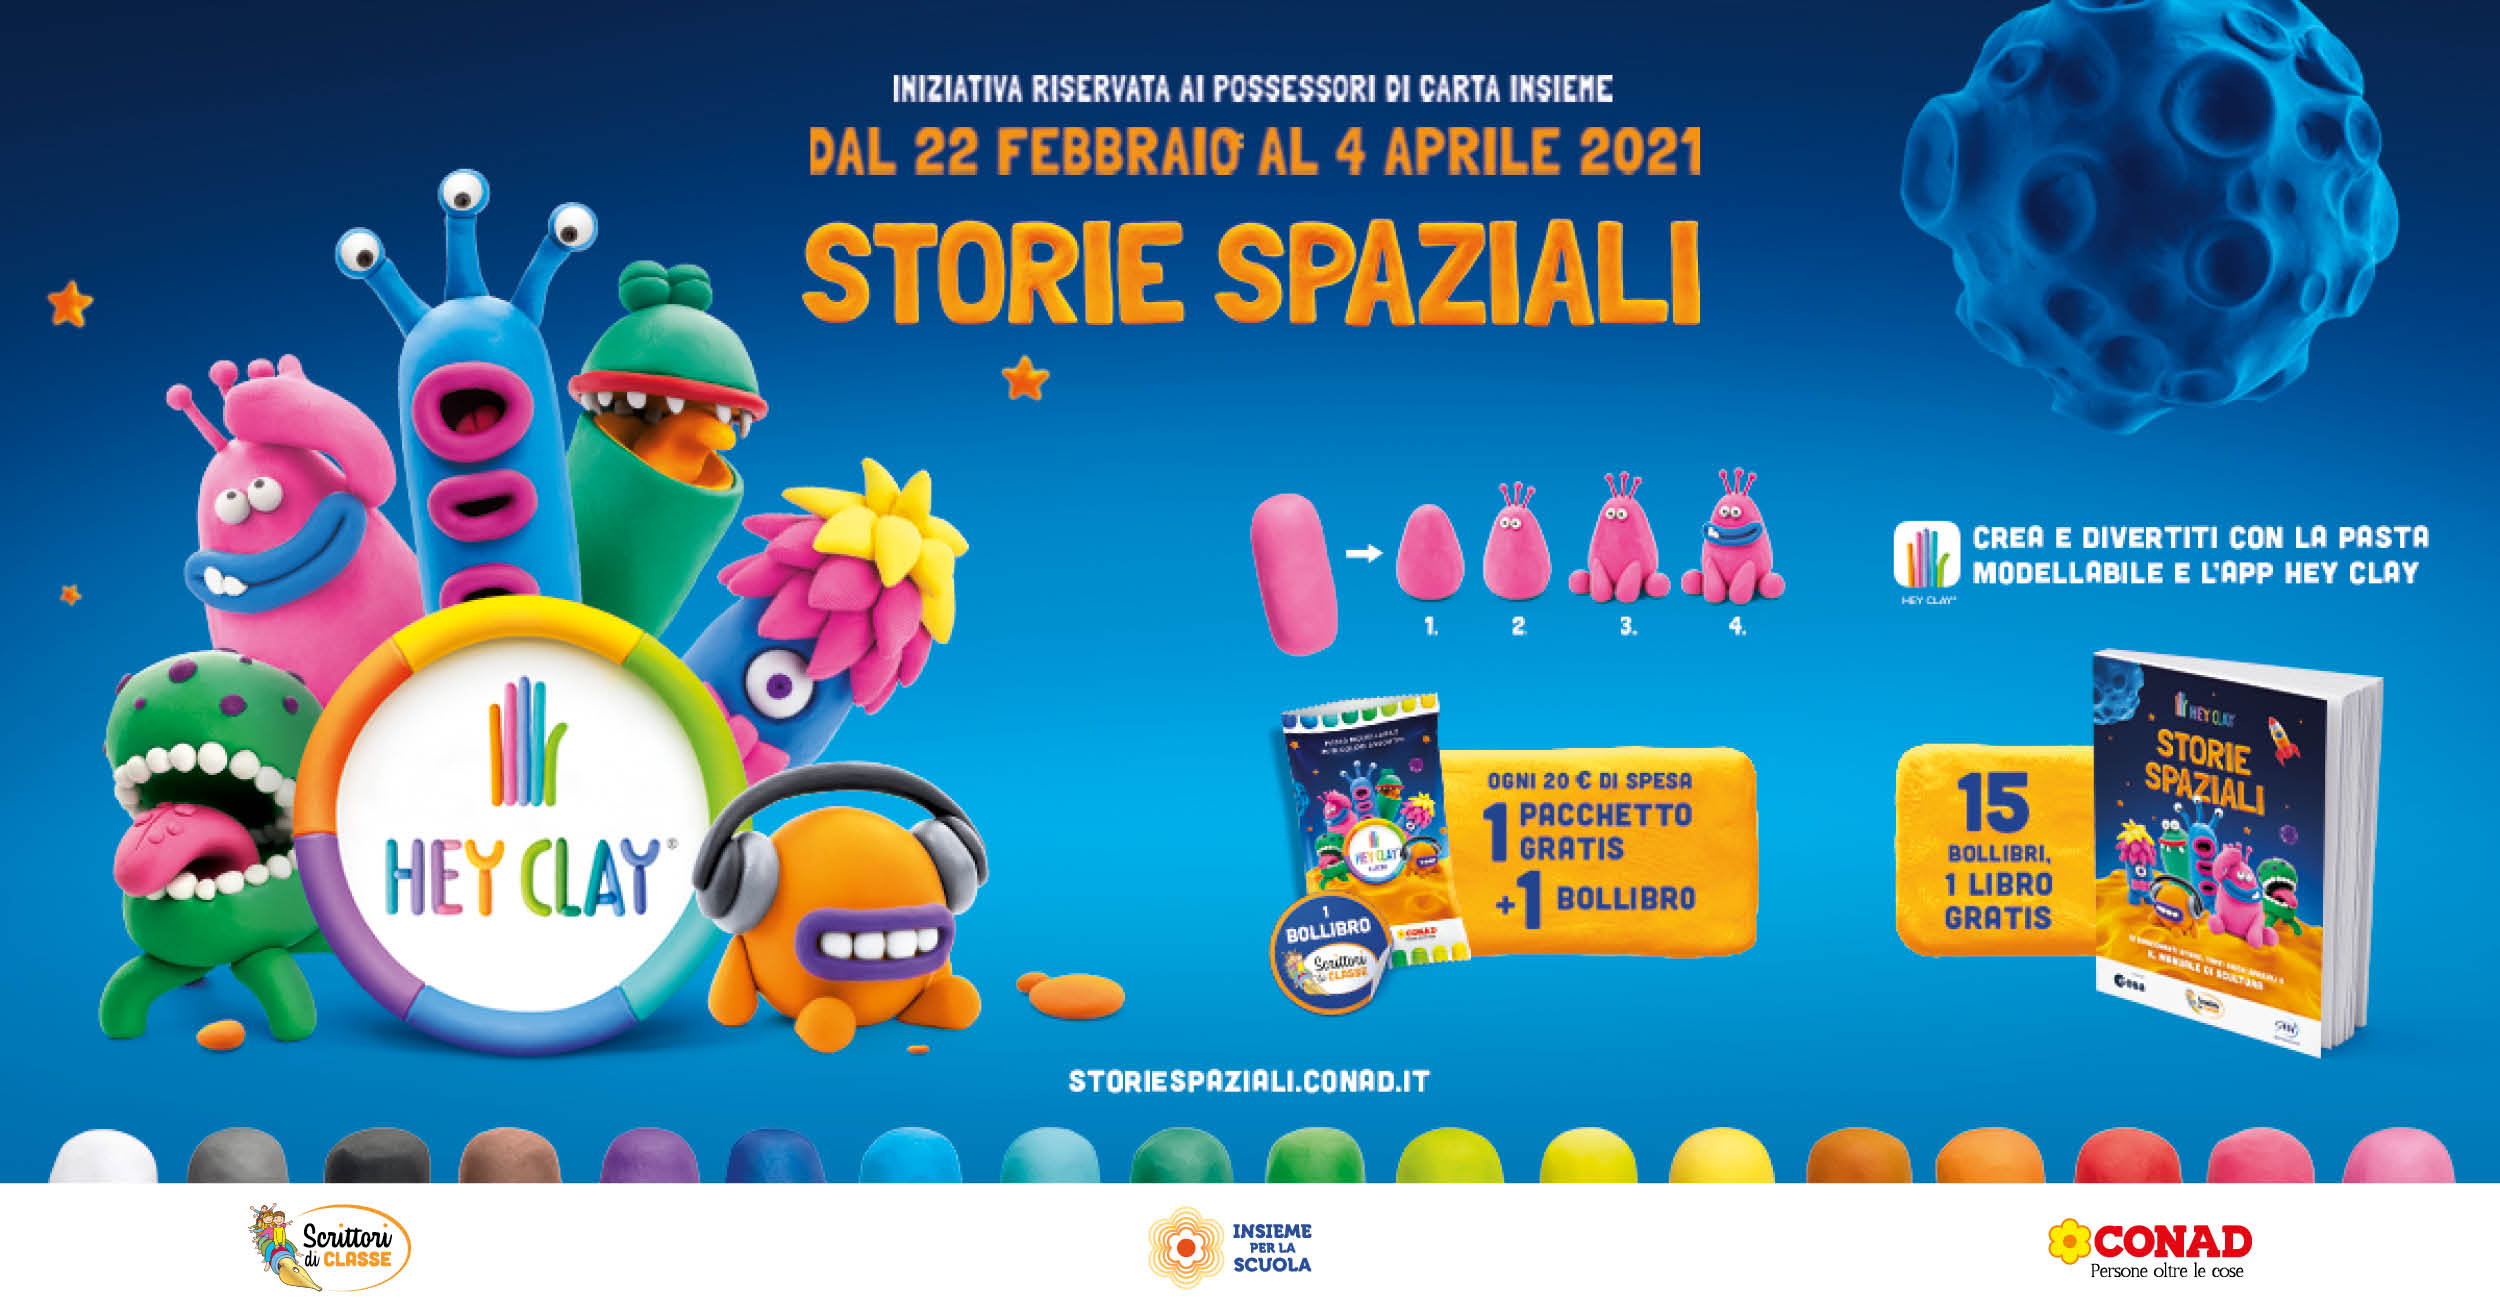 tcc on X: Our new 'Space Stories' campaign launches in leading Italian  retailer Conad's stores in collaboration with the European Space Agency and  the Italian Space Agency. Encouraging students to write stories